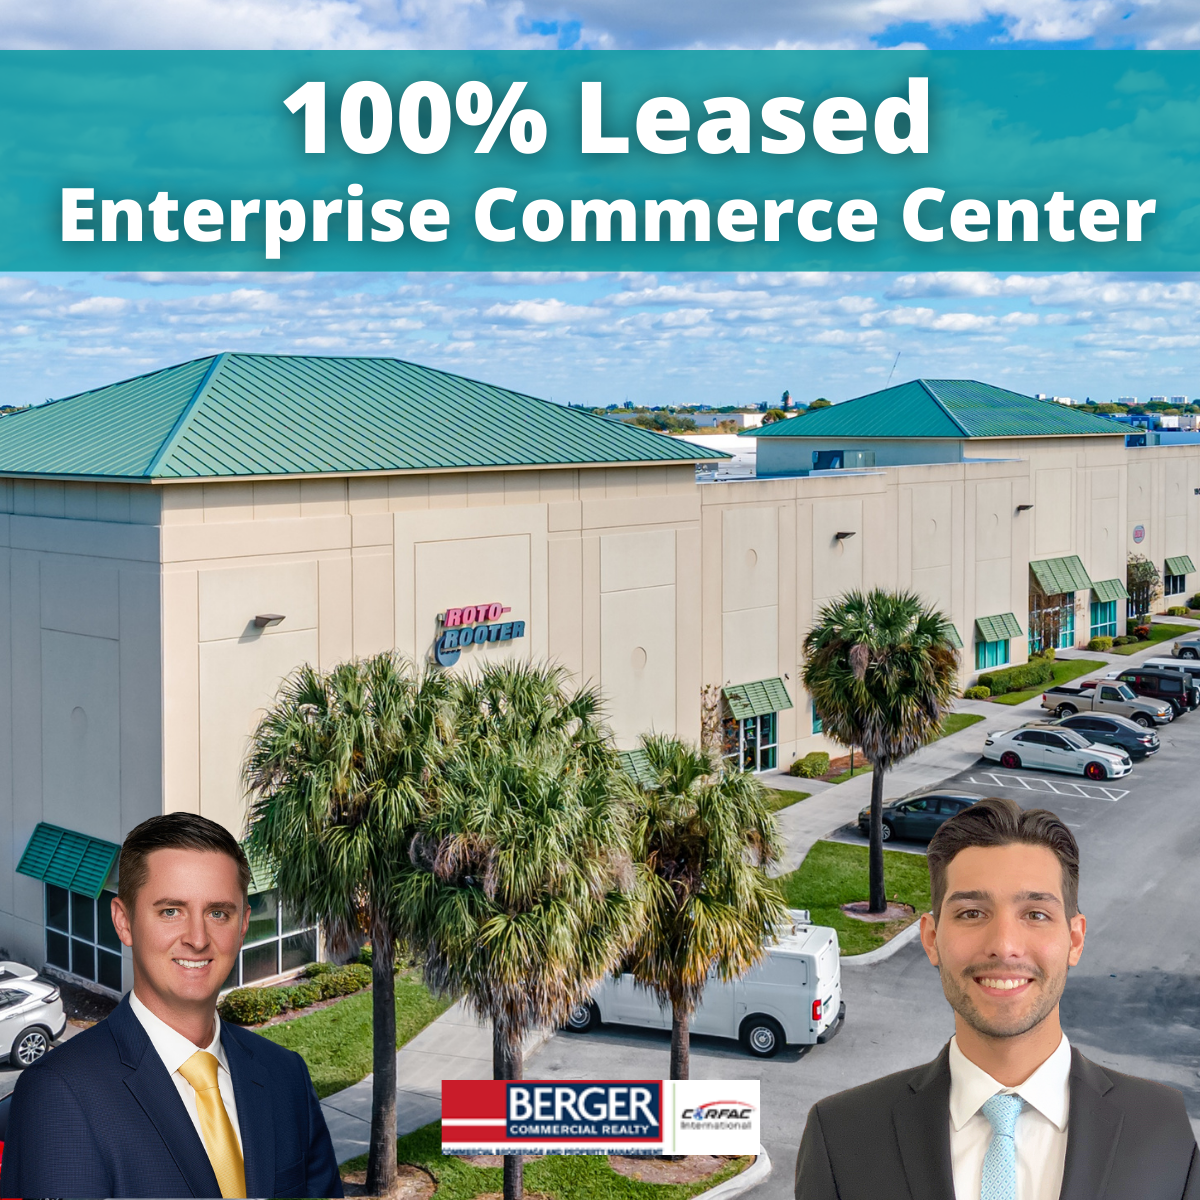 Berger Commercial Secures More Than 106,000 SF In Lease Transactions, Brings Enterprise Commerce Center To Full Occupancy